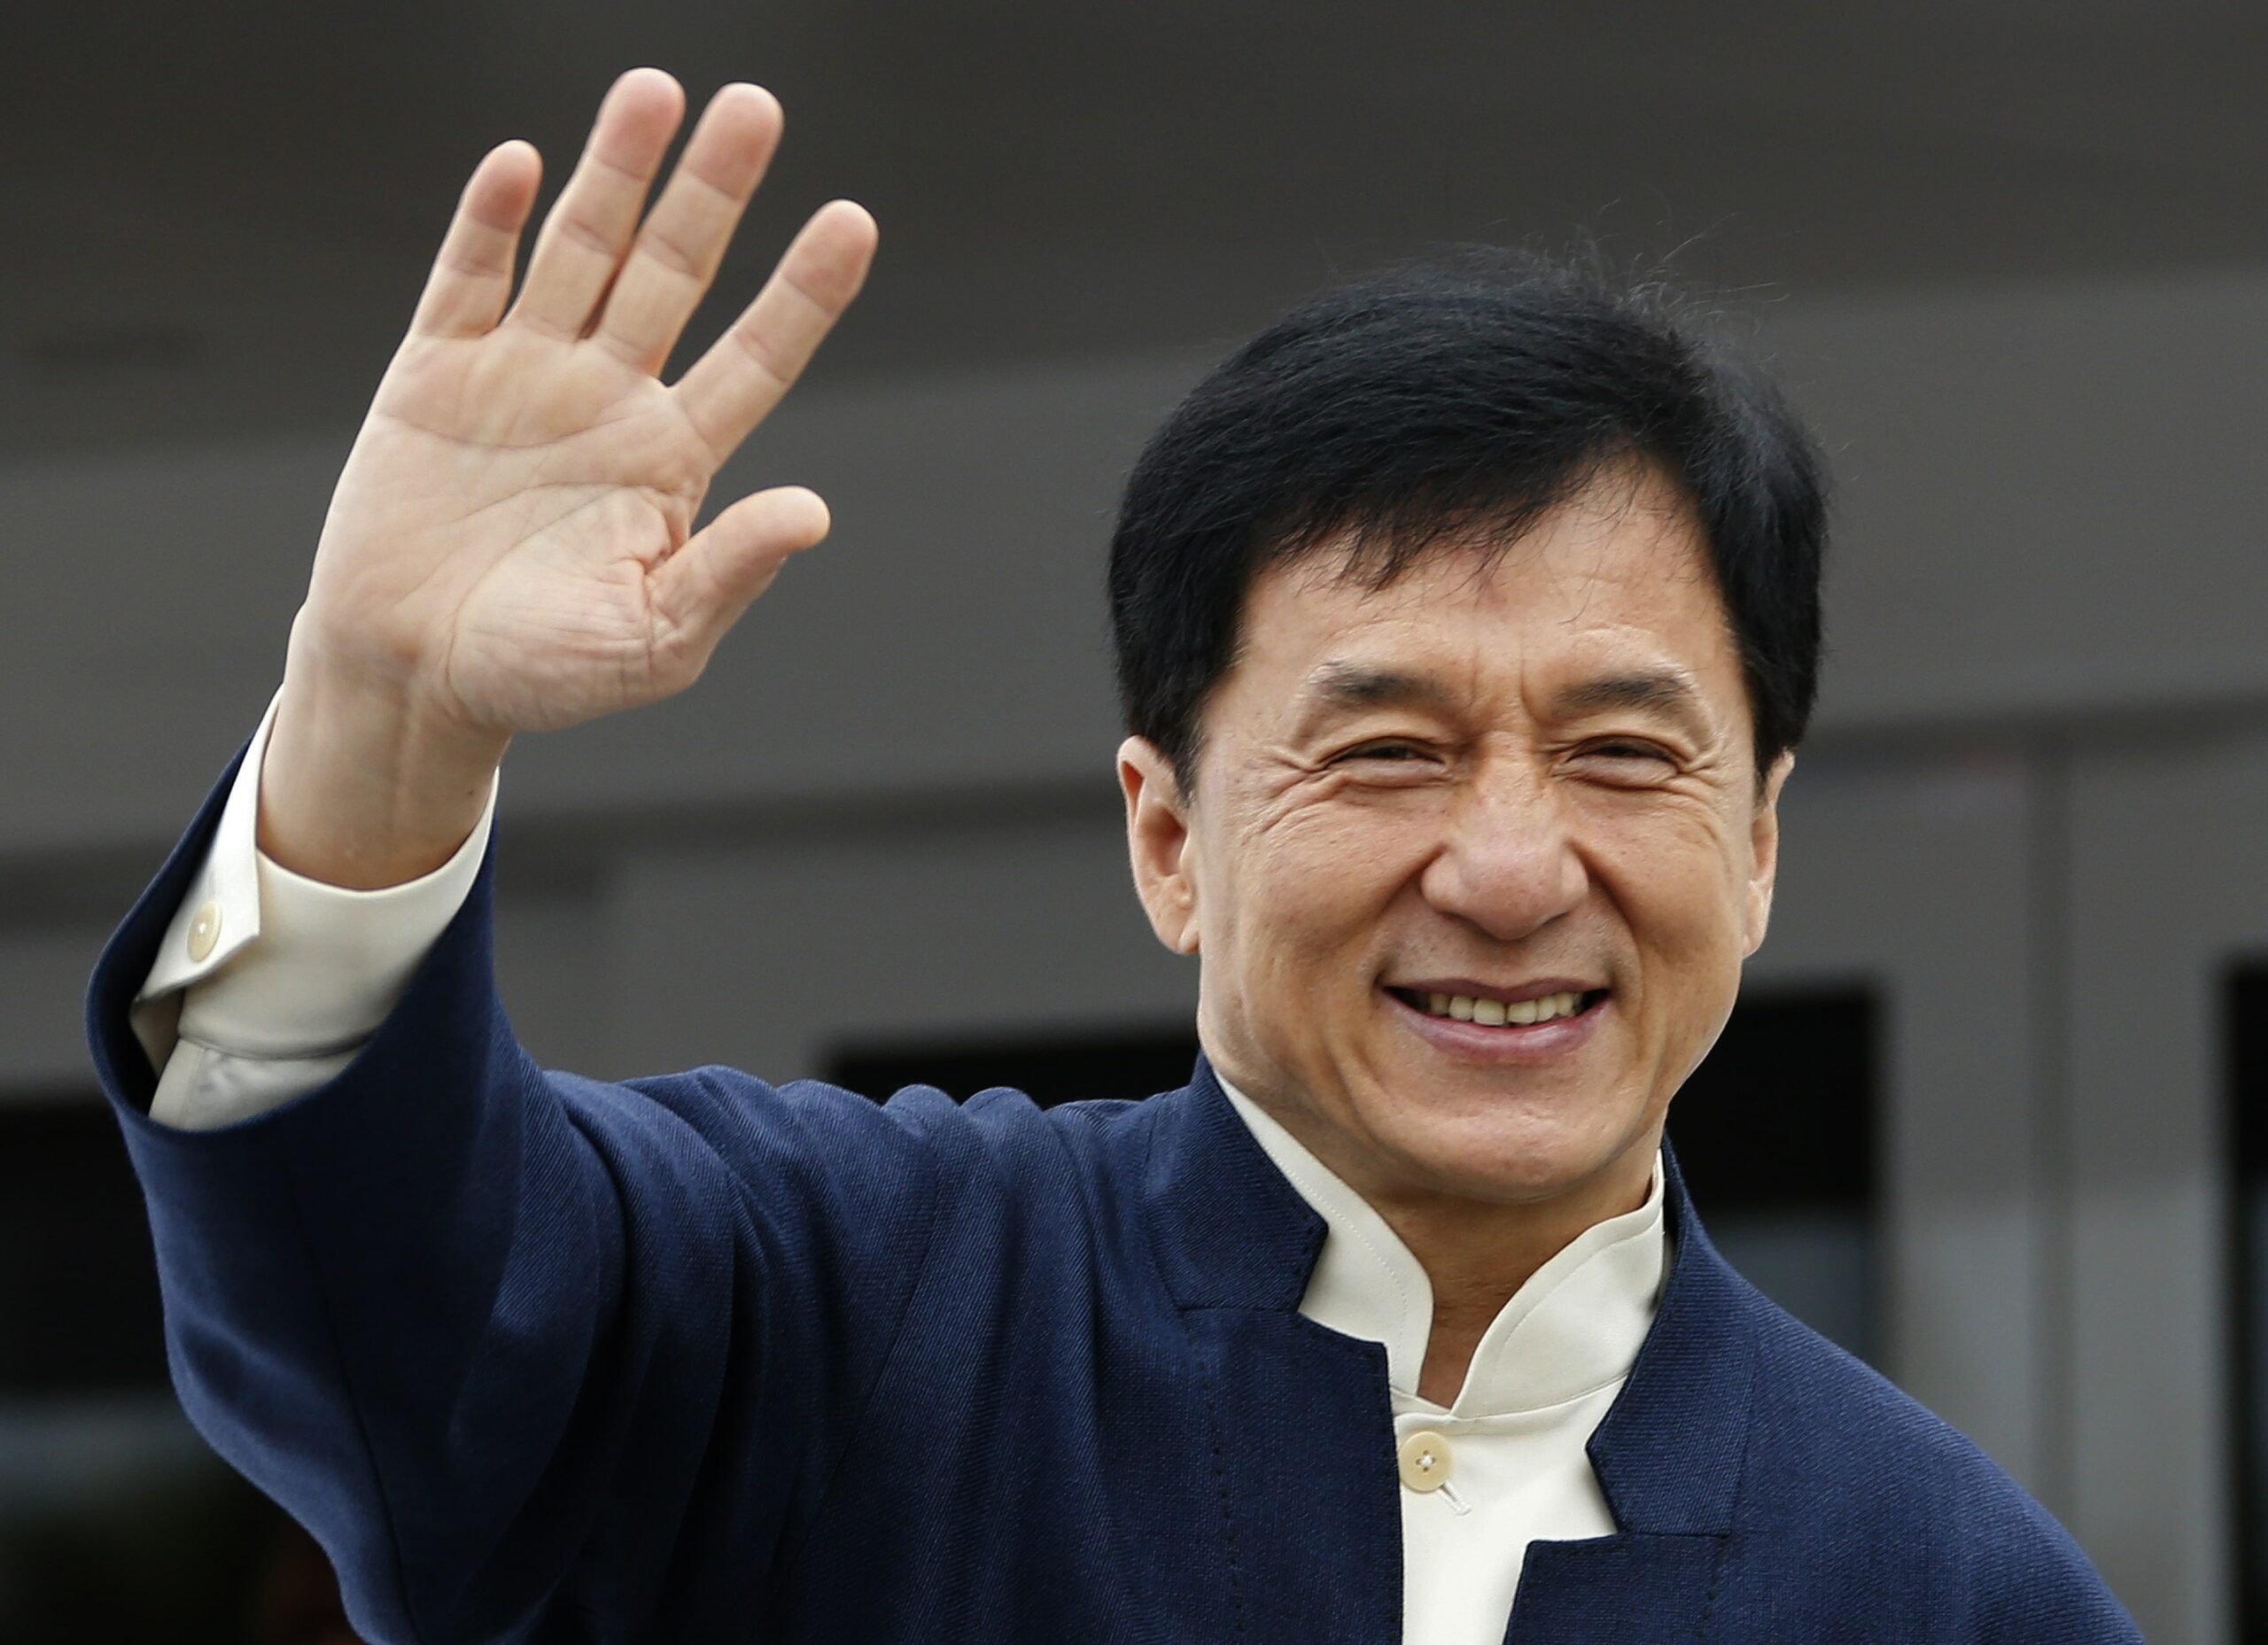 What is Jackie Chan's net worth?